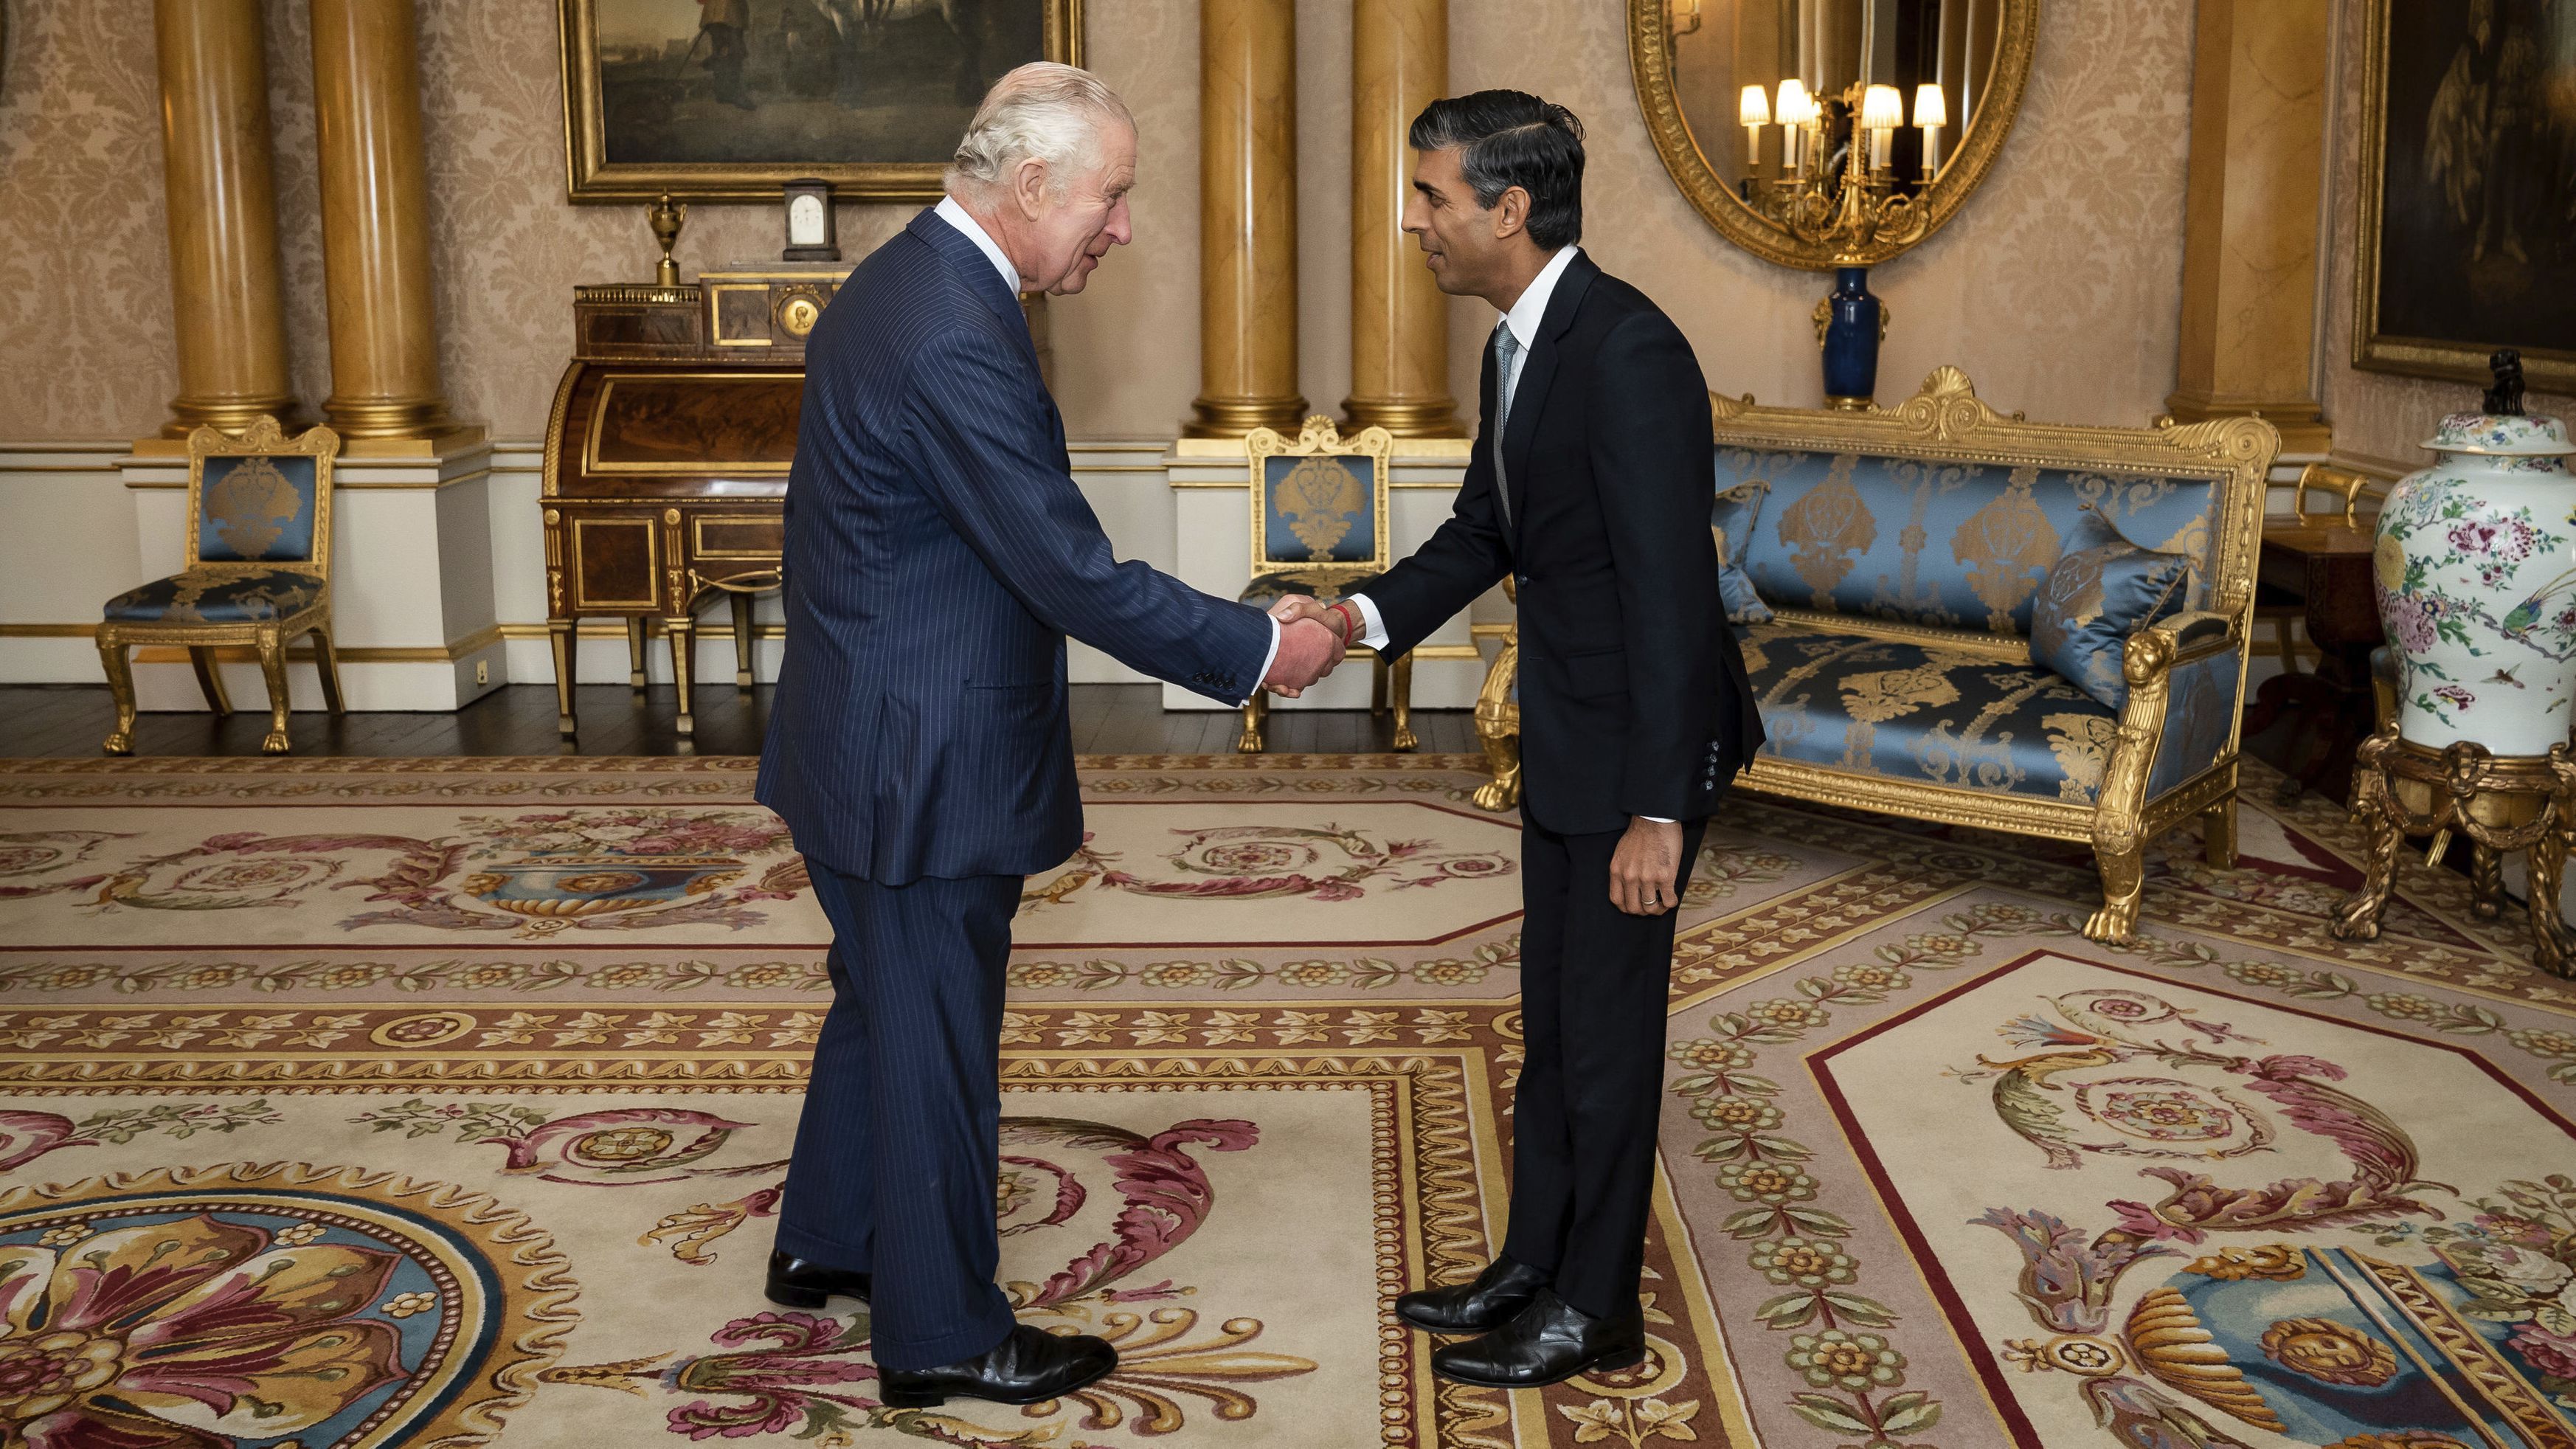 King Charles III welcomes Sunak during an audience at Buckingham Palace, where he invited the newly elected leader of the Conservative Party to become prime minister on October 25.